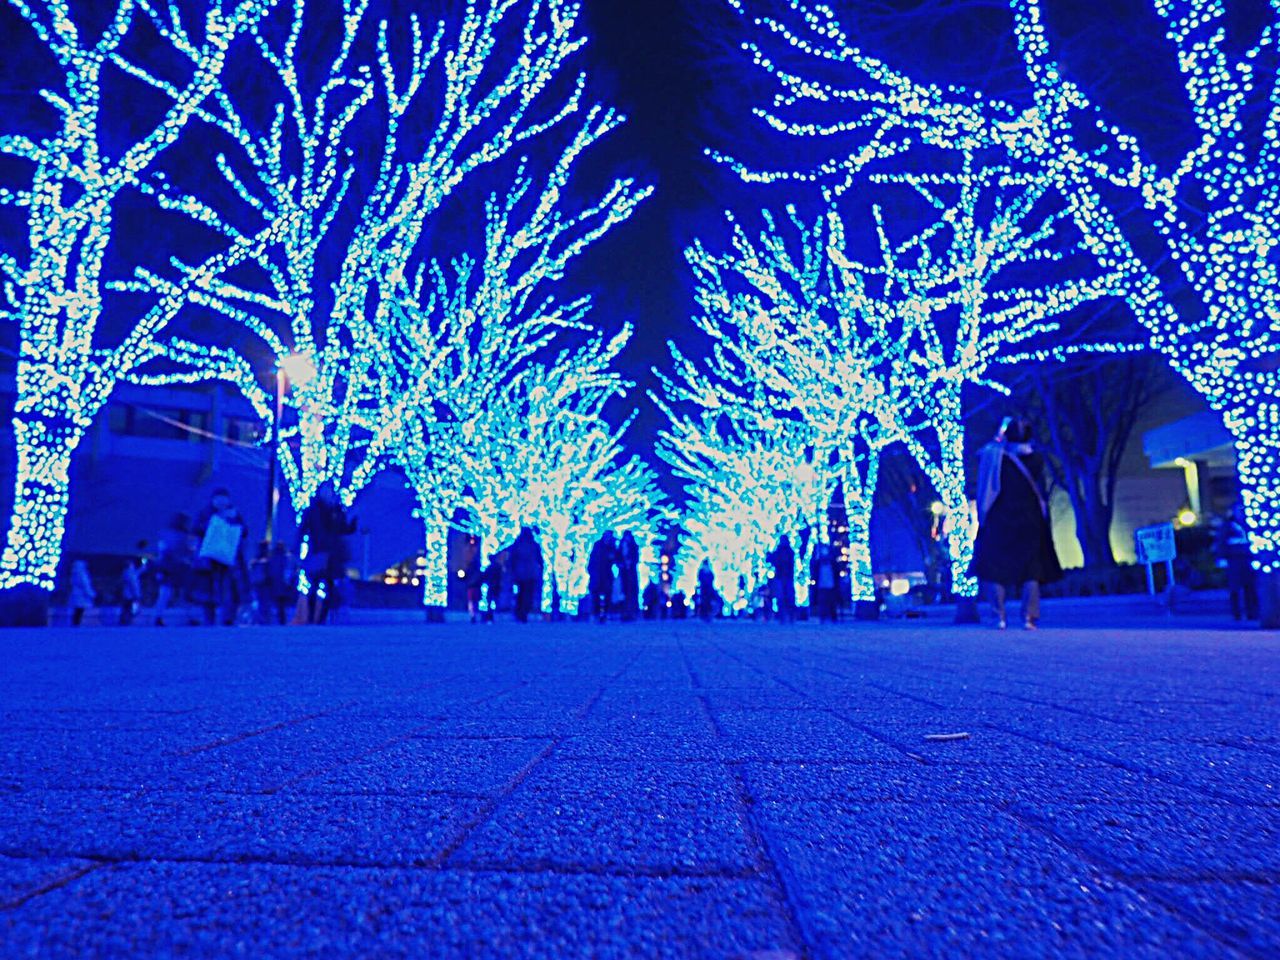 night, tree, blue, illuminated, christmas, travel destinations, celebration, christmas lights, outdoors, sky, celebration event, christmas decoration, large group of people, people, christmas tree, adults only, midnight, adult